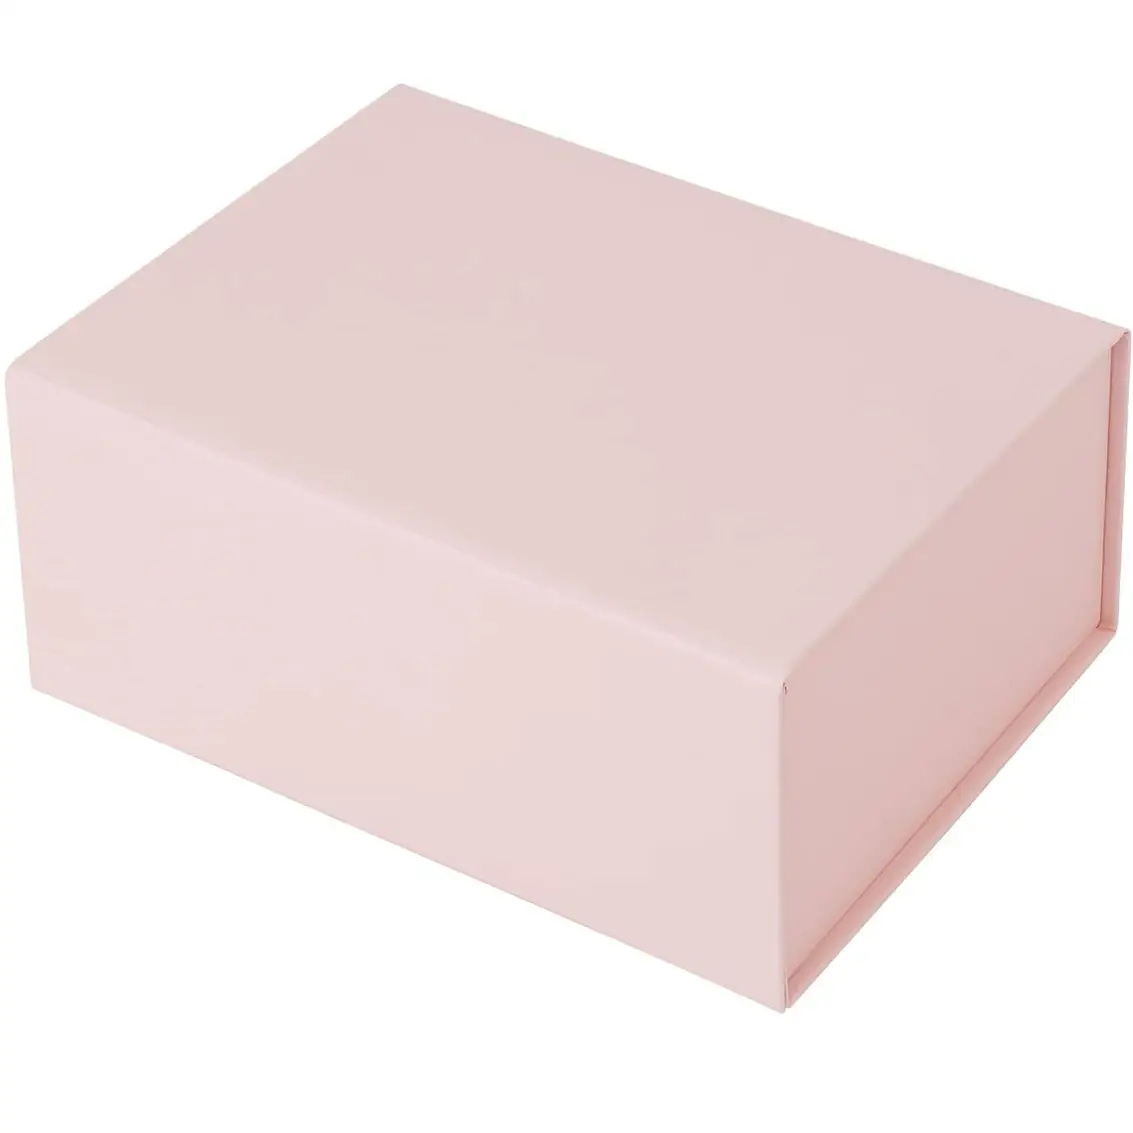 Pink Boxes Gift Boxes Magnetic Closure 8.2 x6.4 x3.3In Wedding Gift with Lids Collapsible Sturdy Baby Gift Box